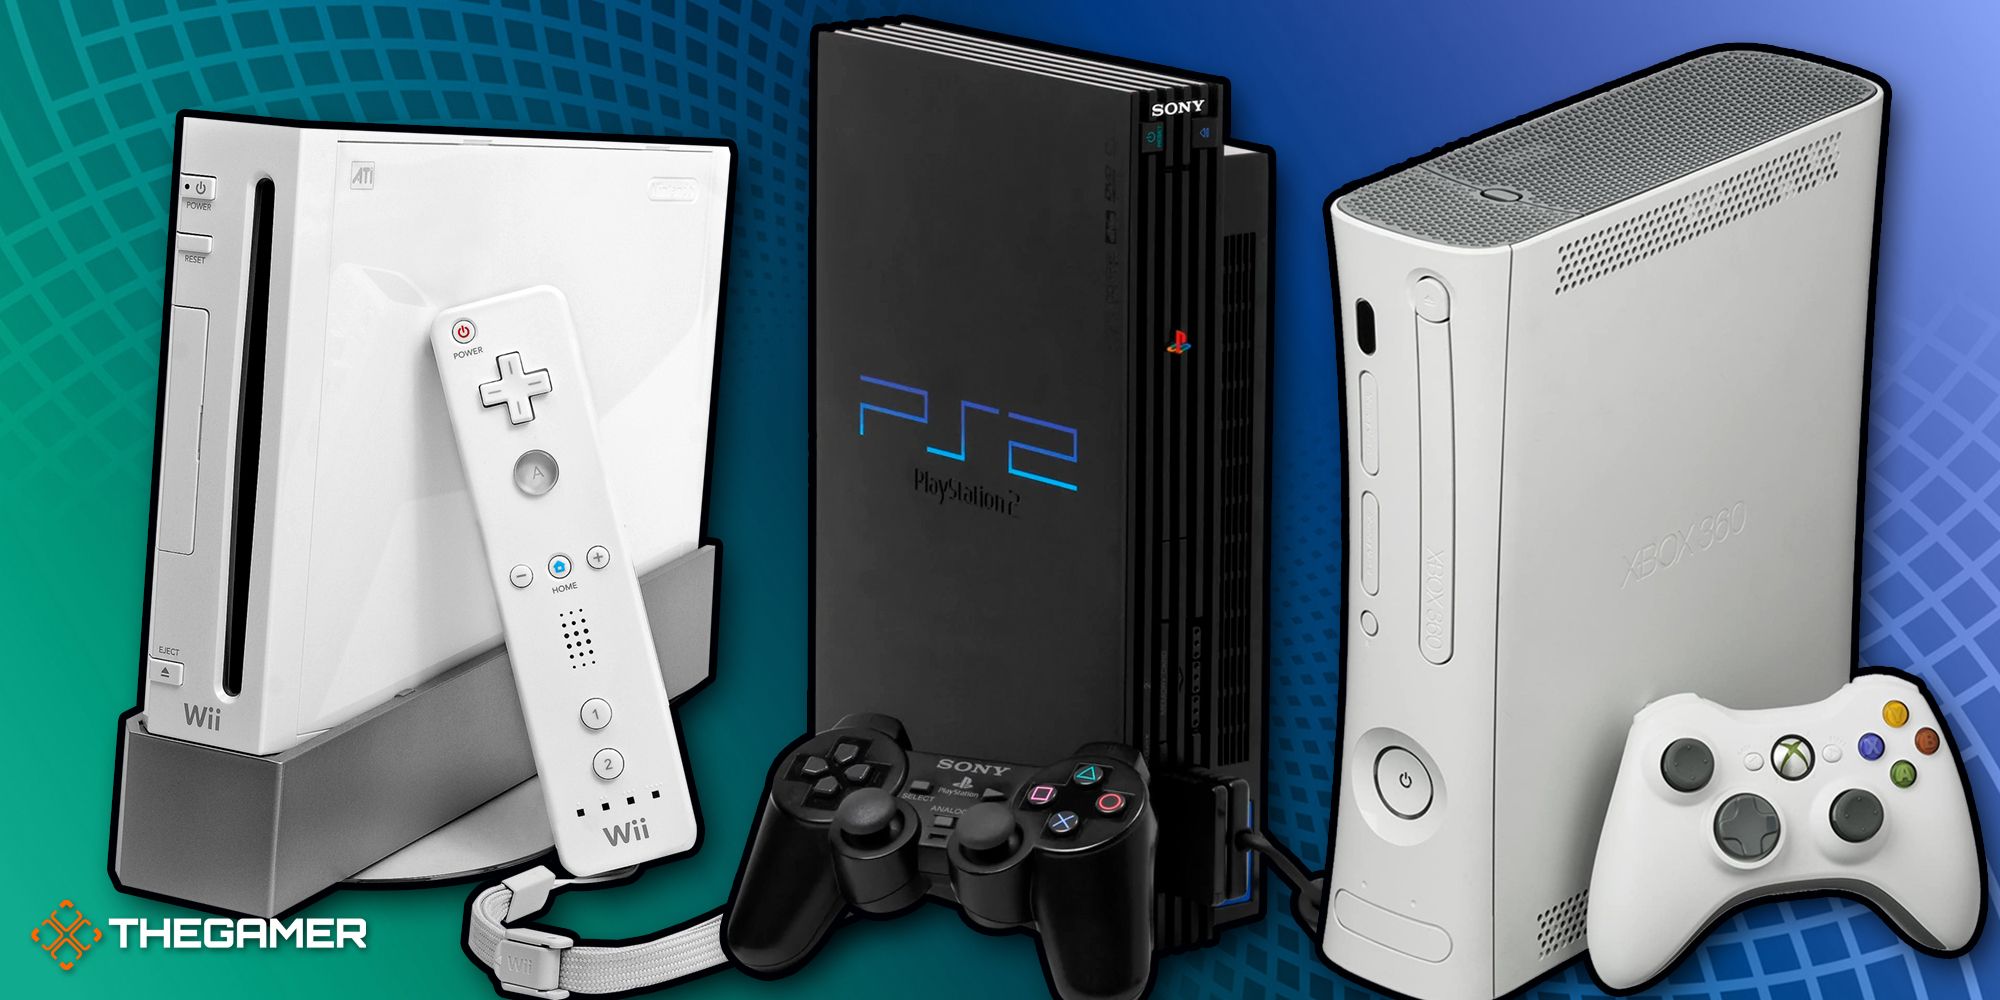 Pictures of Nintendo Wii, Playstation 2 and Xbox 360.